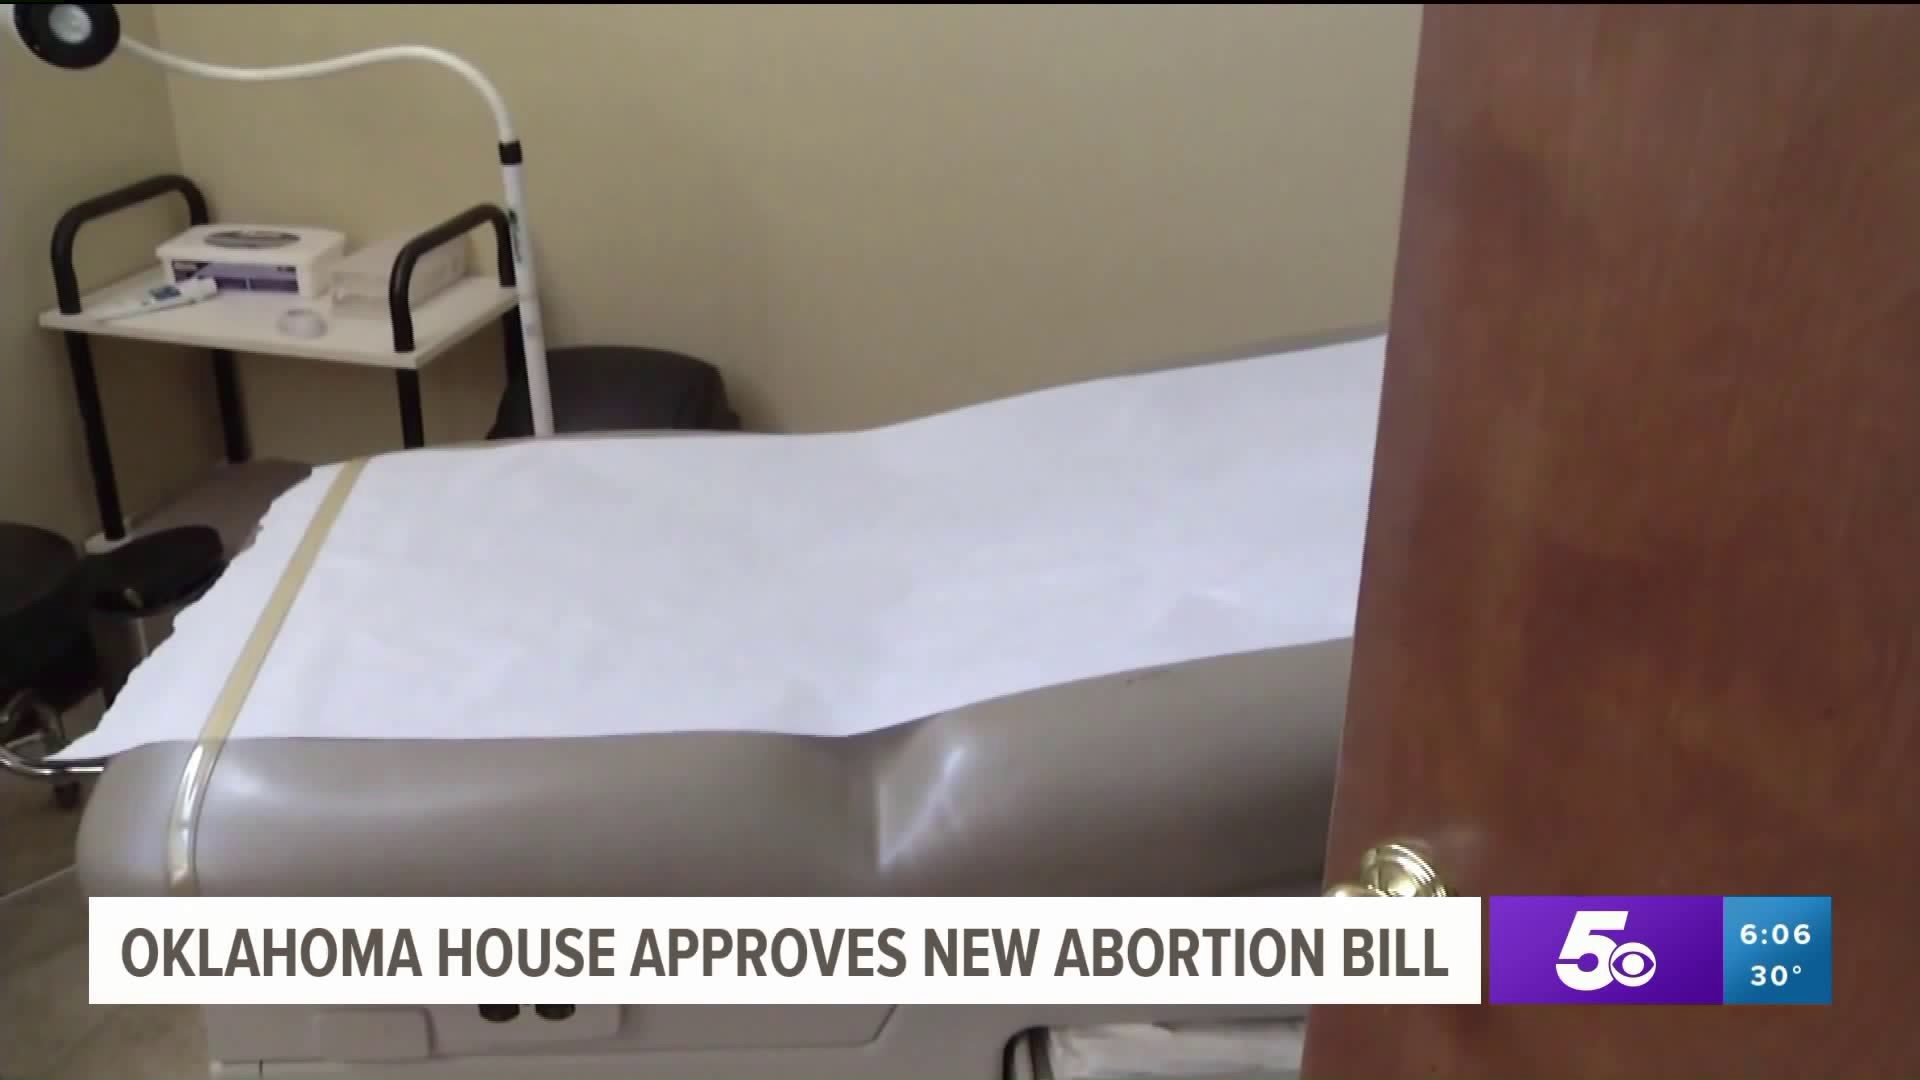 Oklahoma House Approves Bill To Revoke Licenses Of Doctors Who Perform Abortions